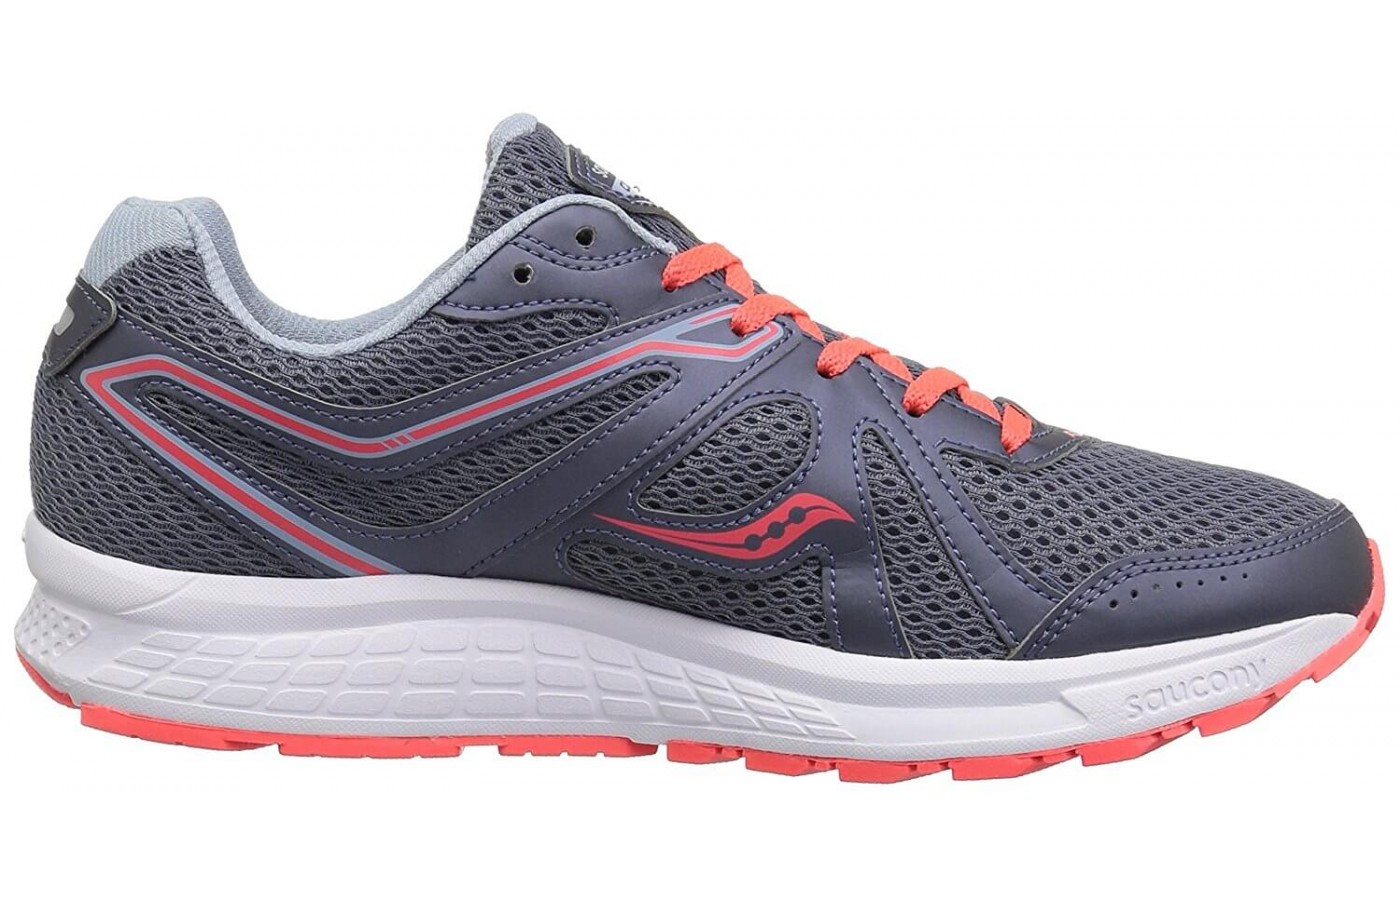 The Saucony Cohesion 11 has a mesh upper